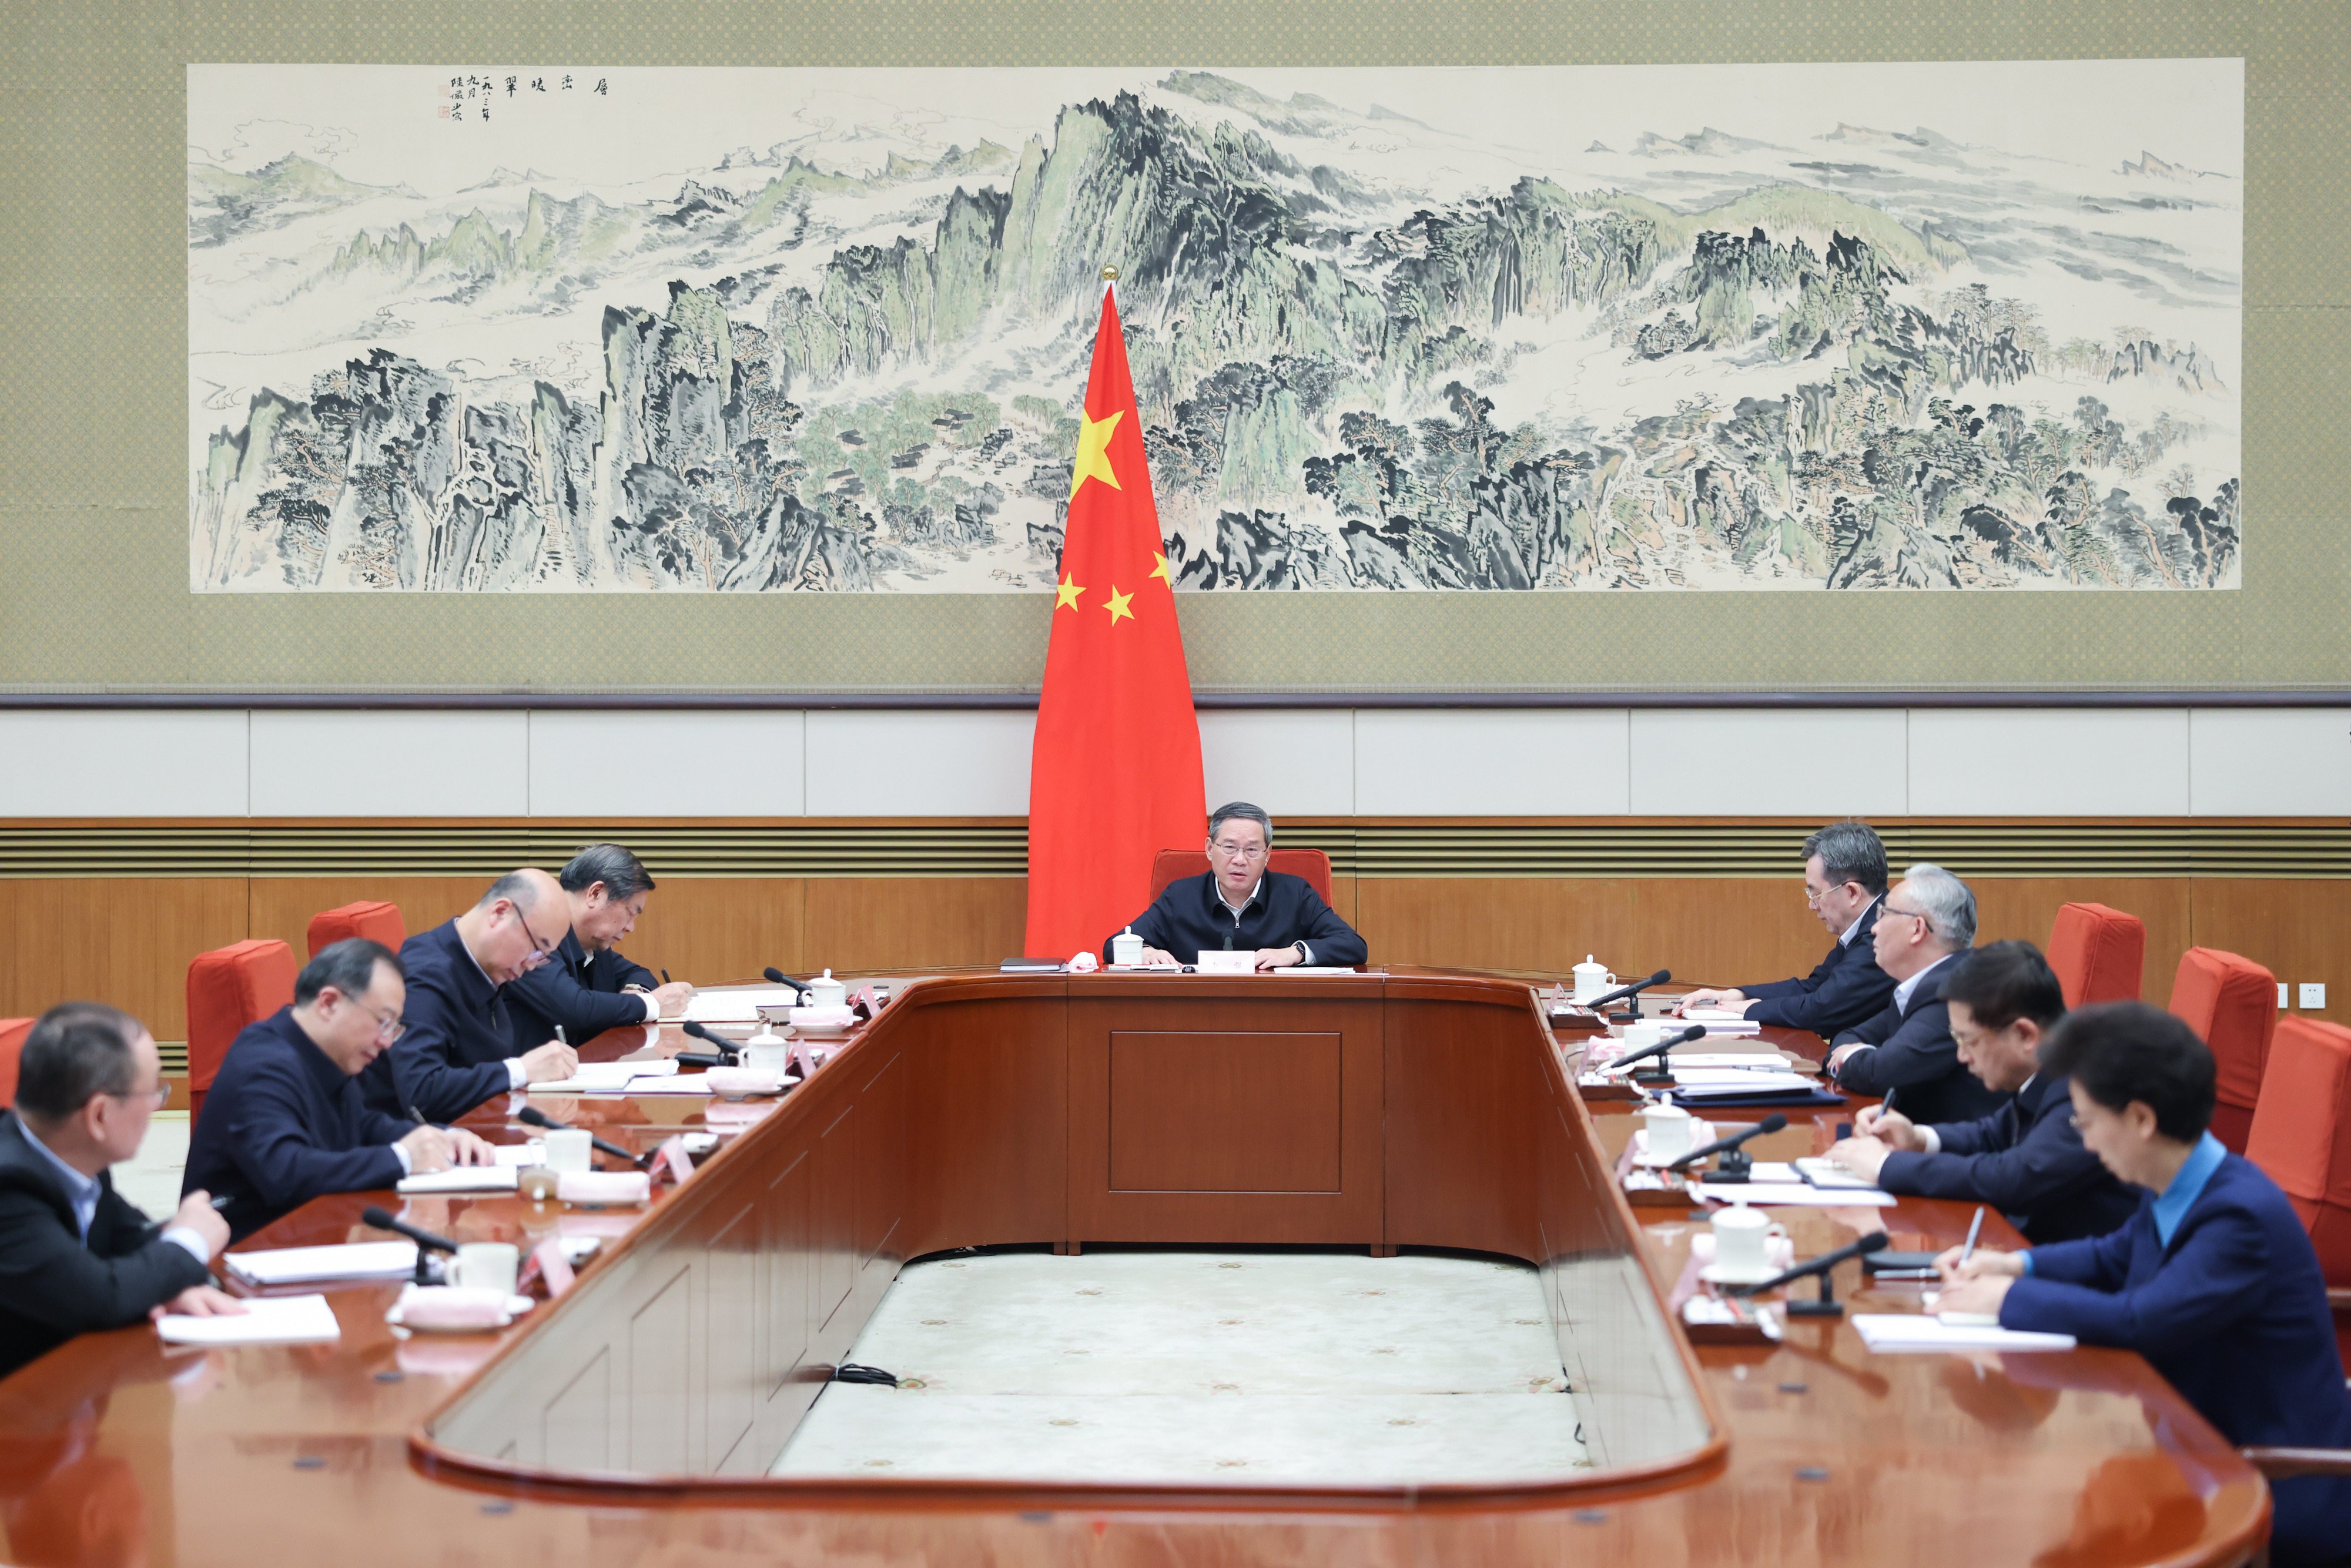 Premier Li Qiang chairs a themed study session of the State Council on Monday. Photo: Xinhua